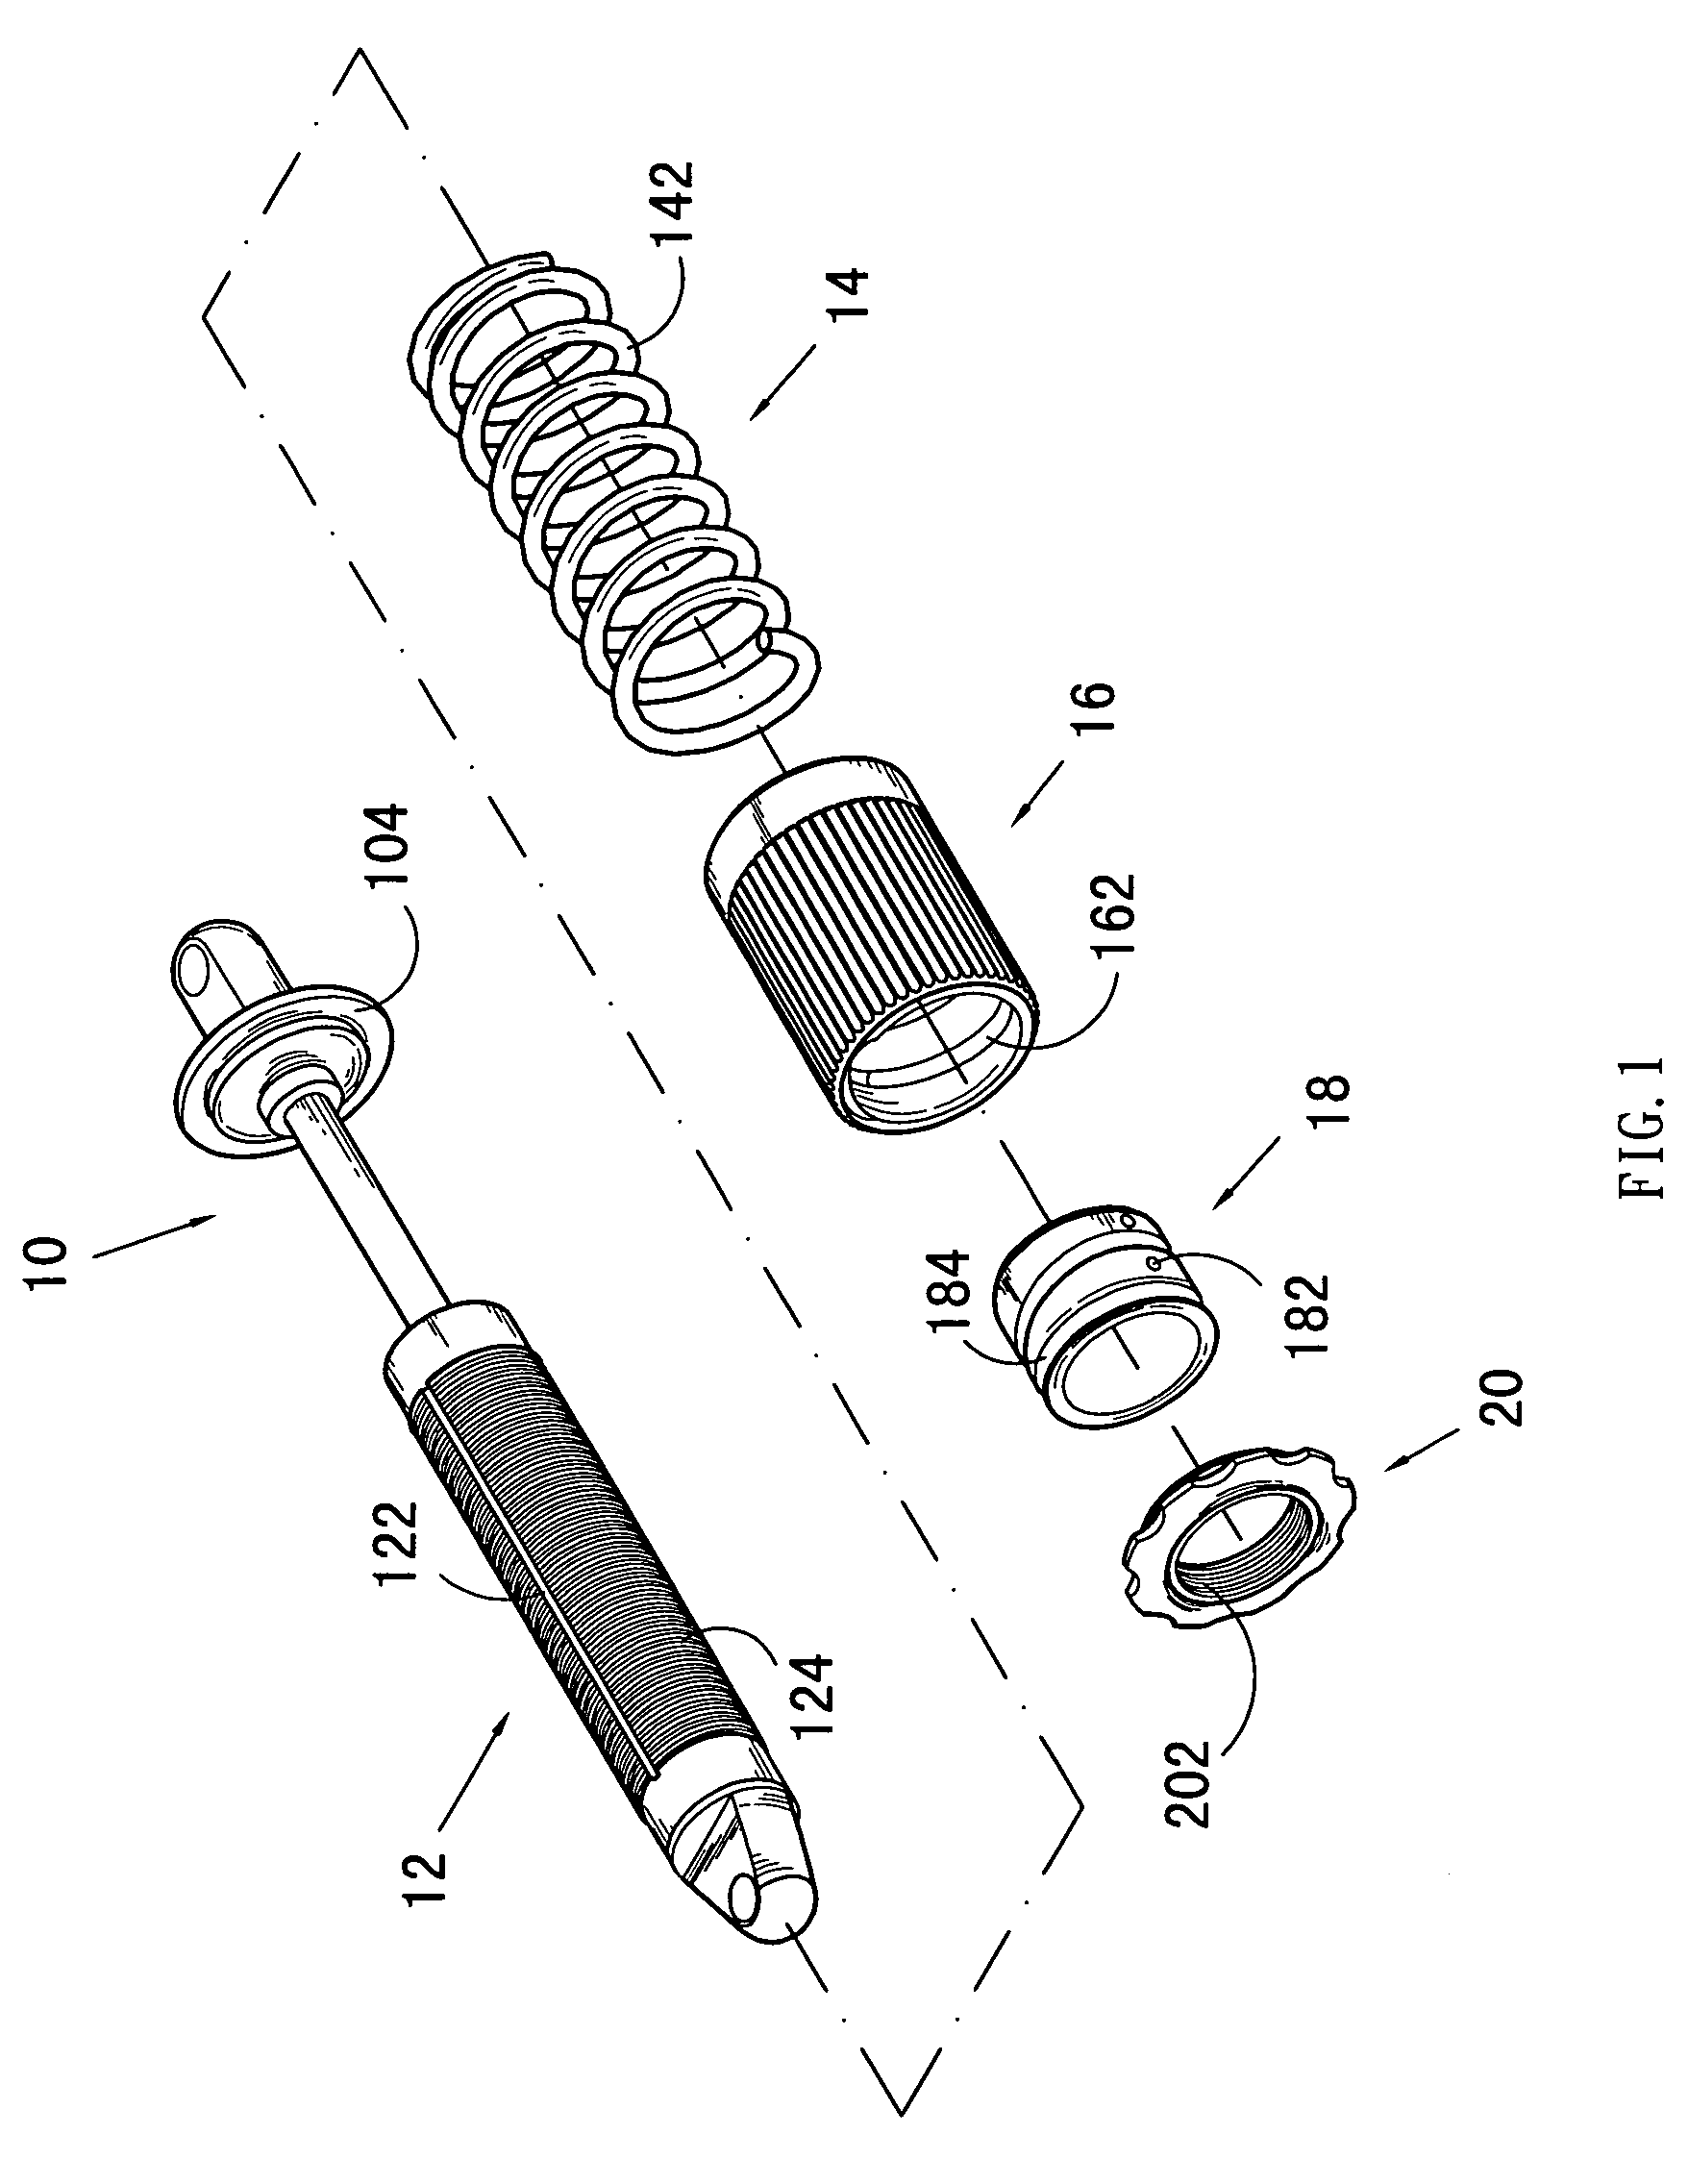 Adjusting mechanism with a helical spring of large diameter